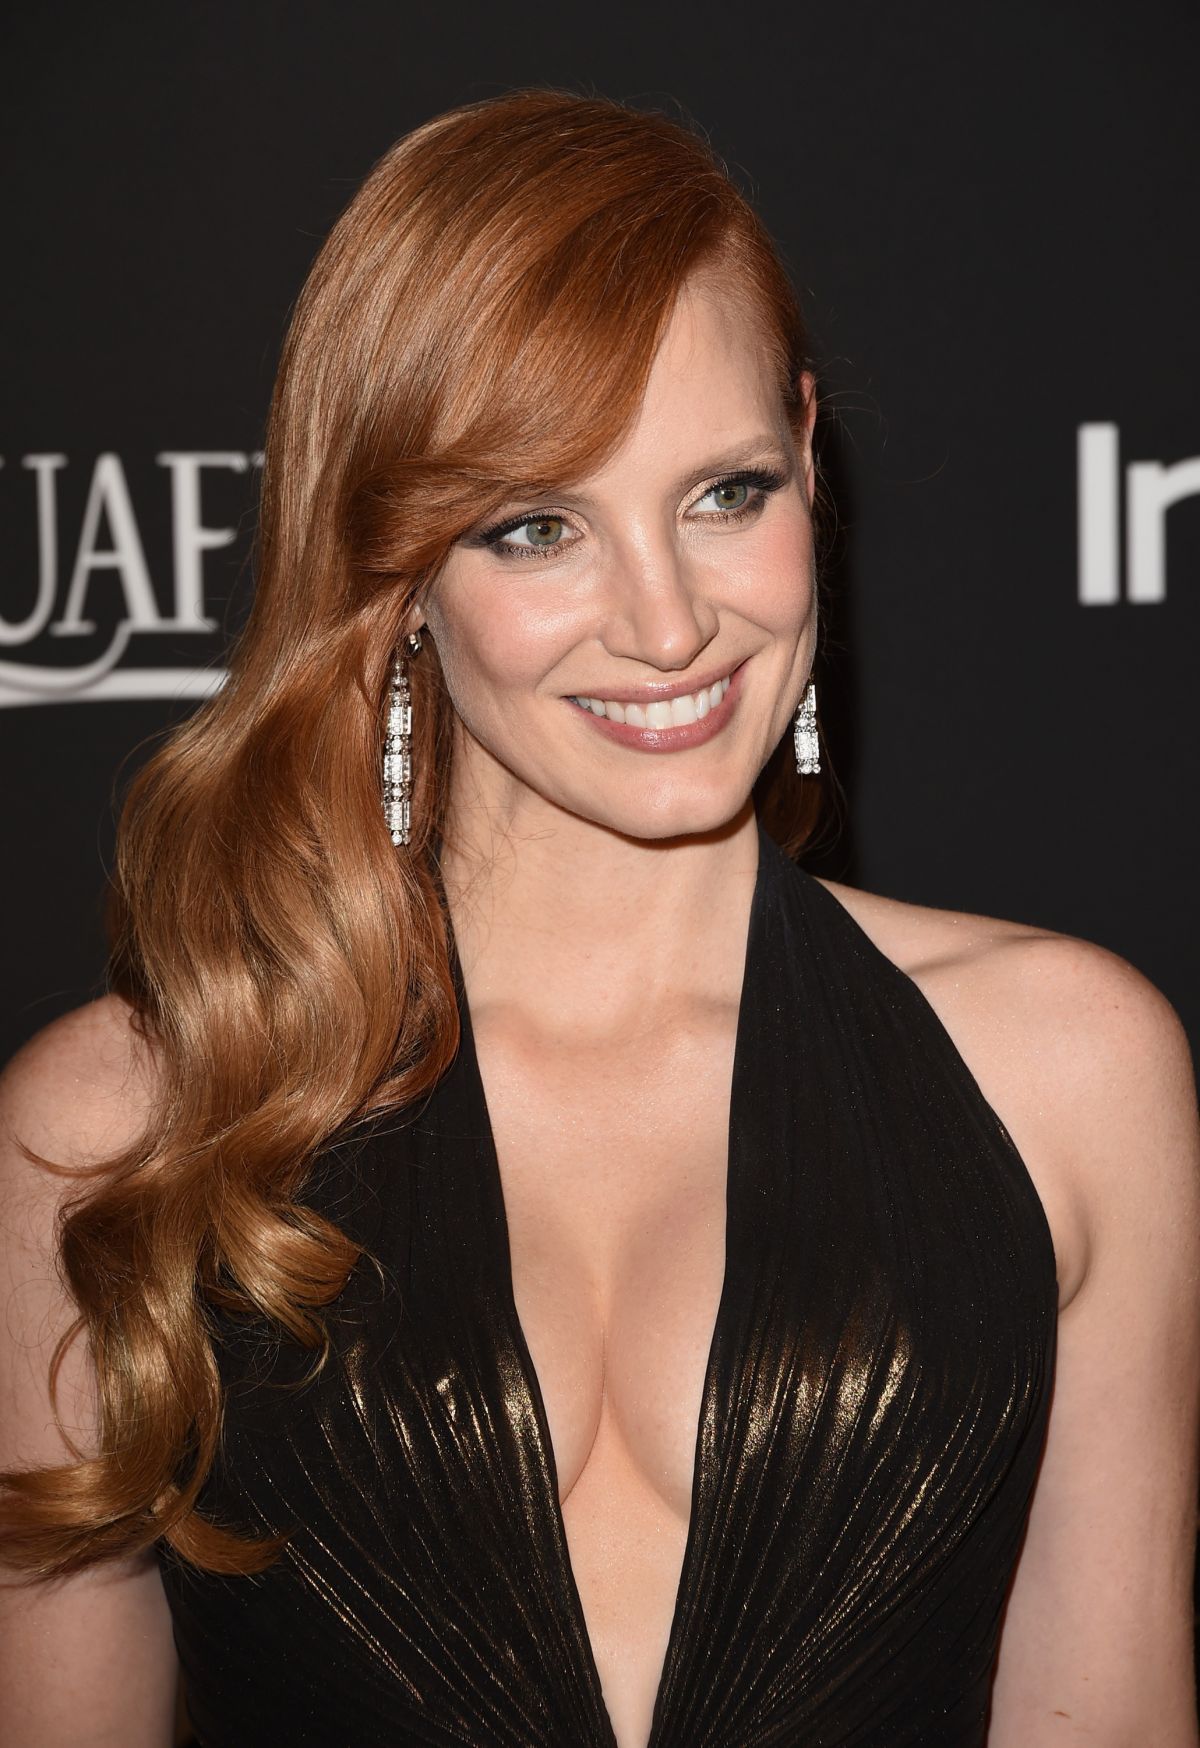 jessica-chastain-at-instyle-and-warner-bros-golden-globes-party-in-beverly-hills_1.jpg